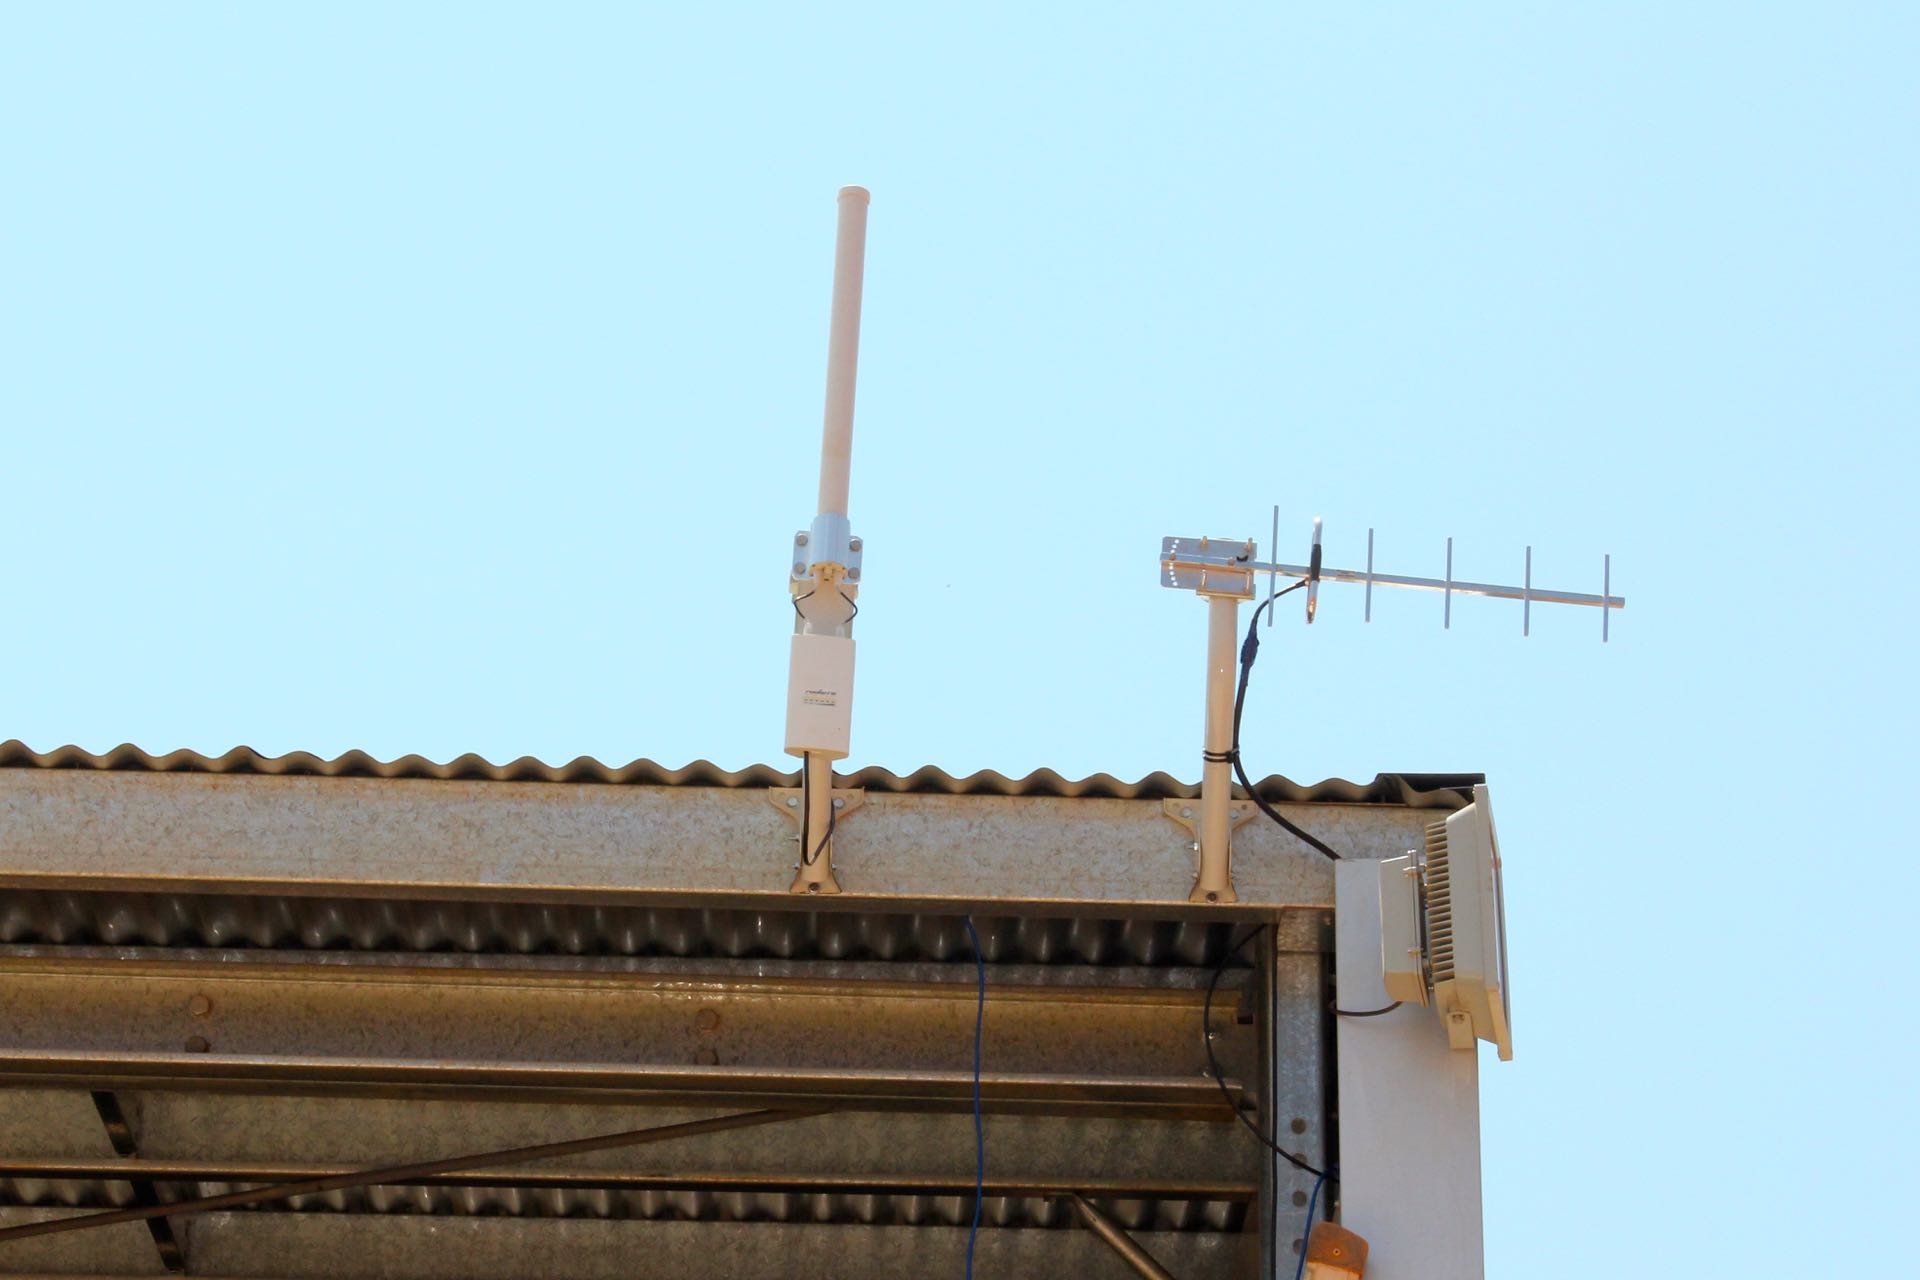 WiFi radio and 3G antennas mounted to shed roof